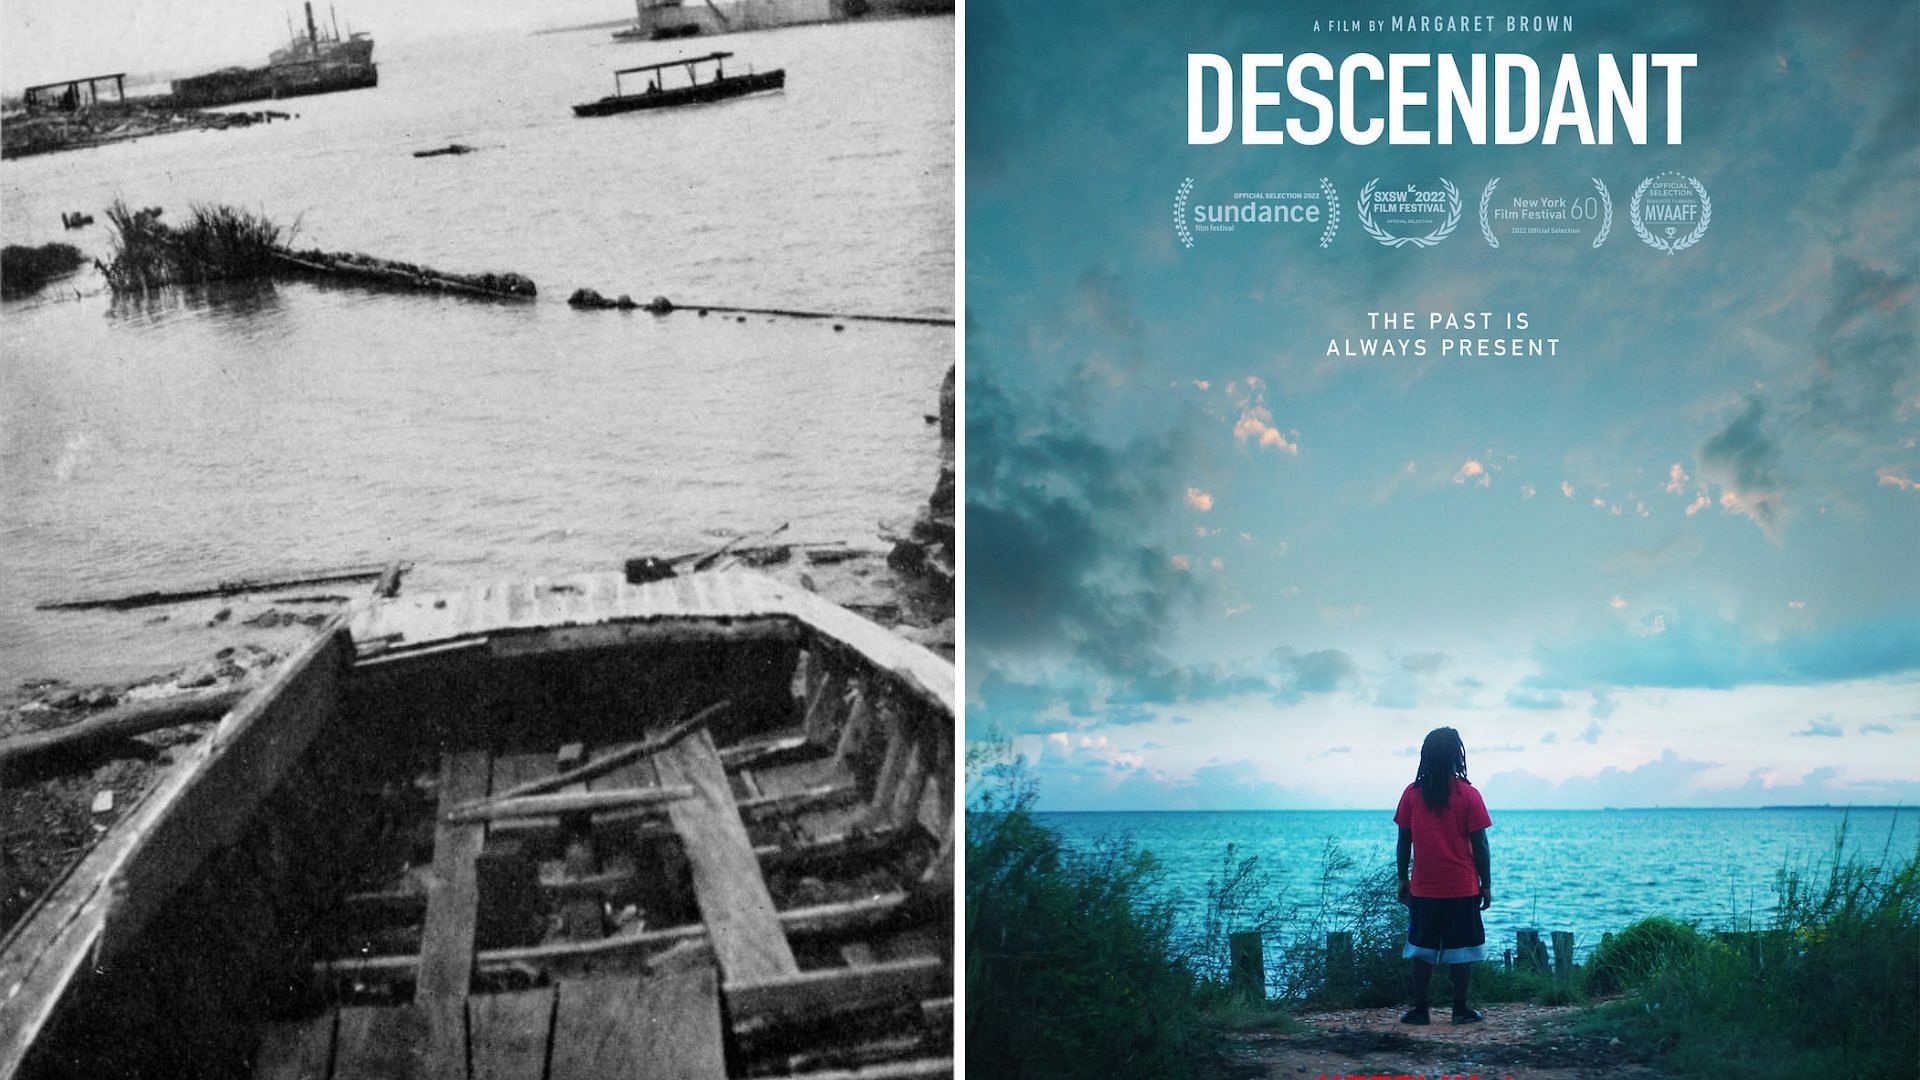 An image of the wreck of Clotilda (left) and The Descendant official poster (Images via Wikipedia and Netflix)